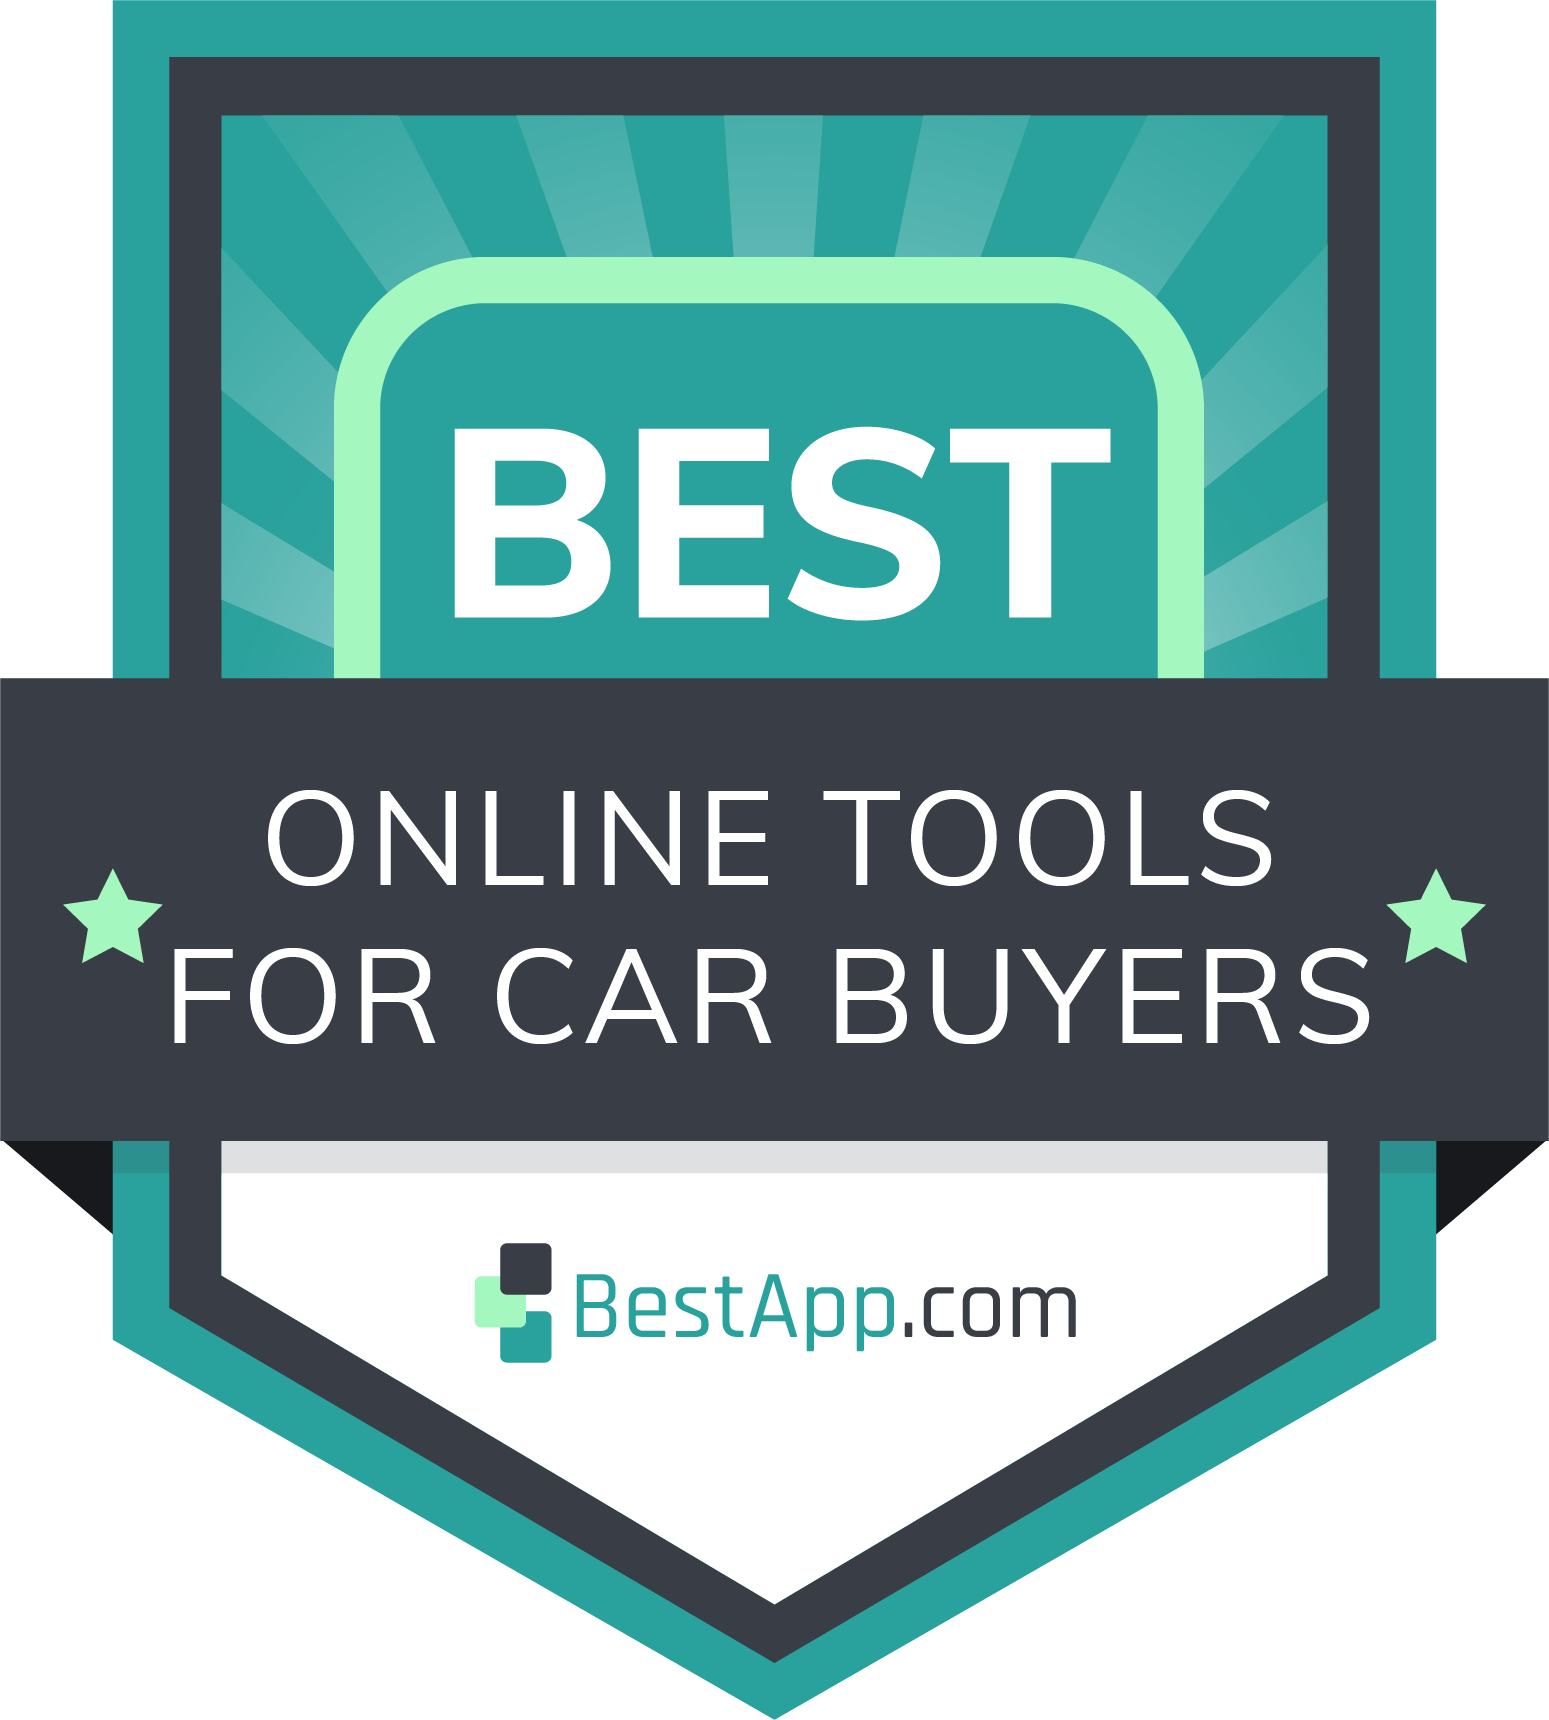 Best Online Tools for Car Buyers Badge